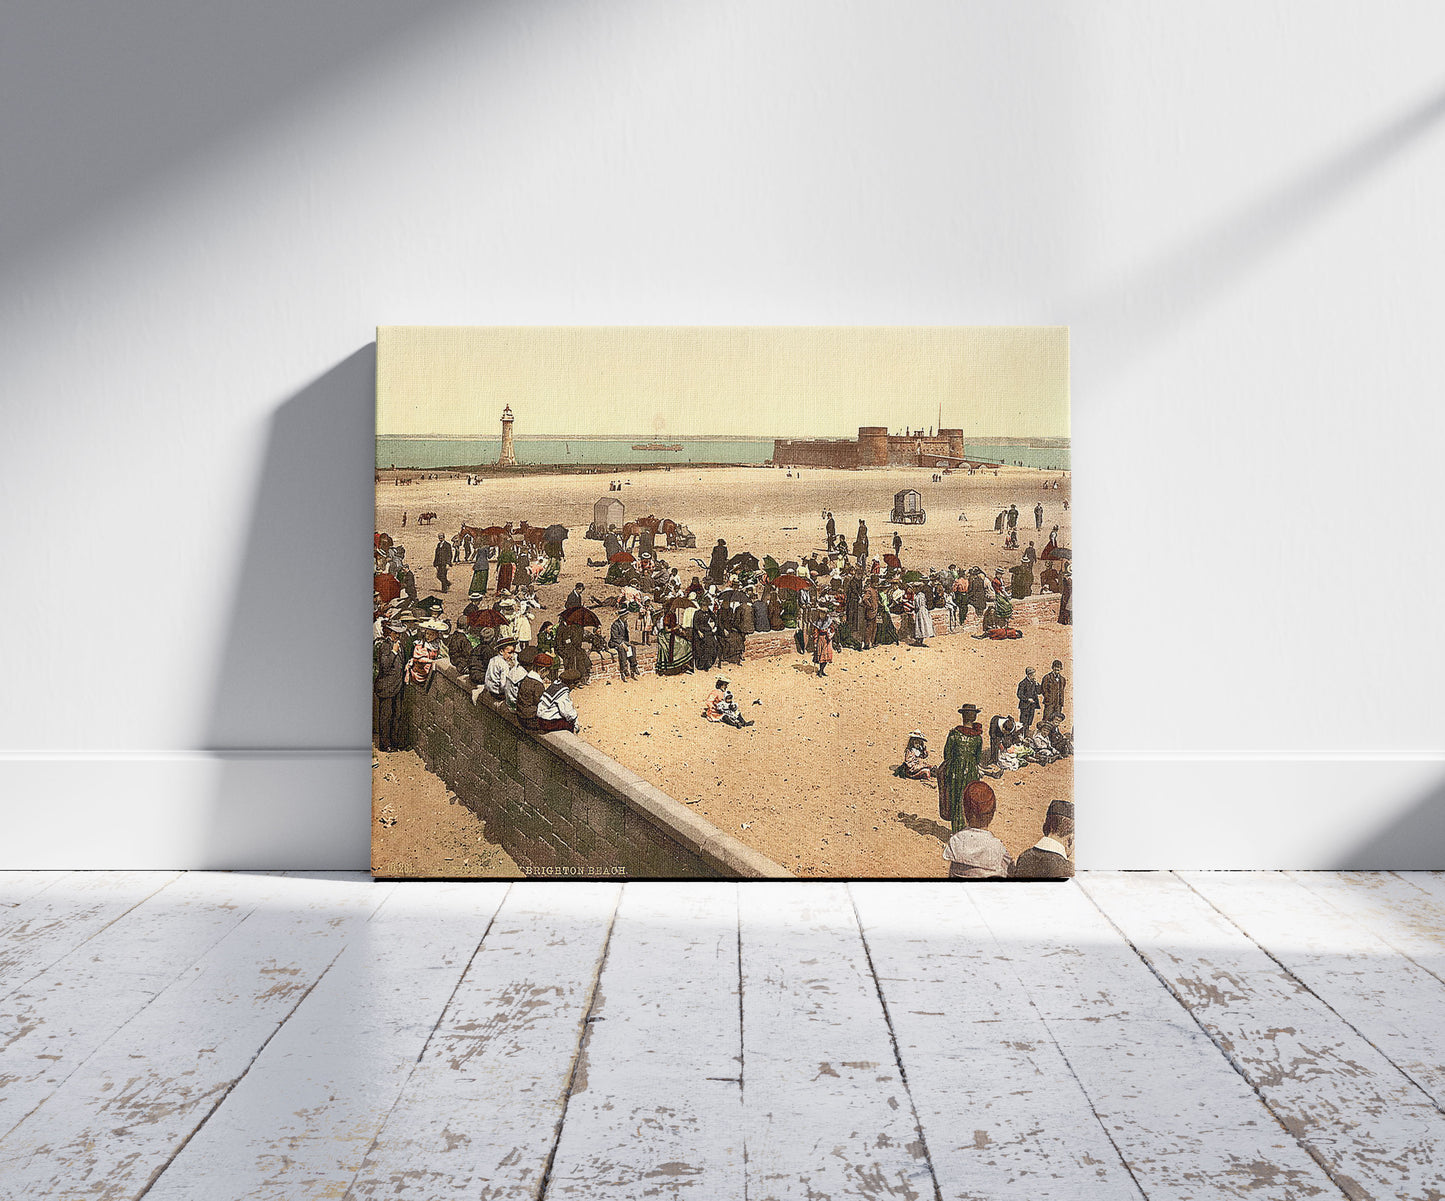 A picture of New Brighton Beach, Liverpool, England